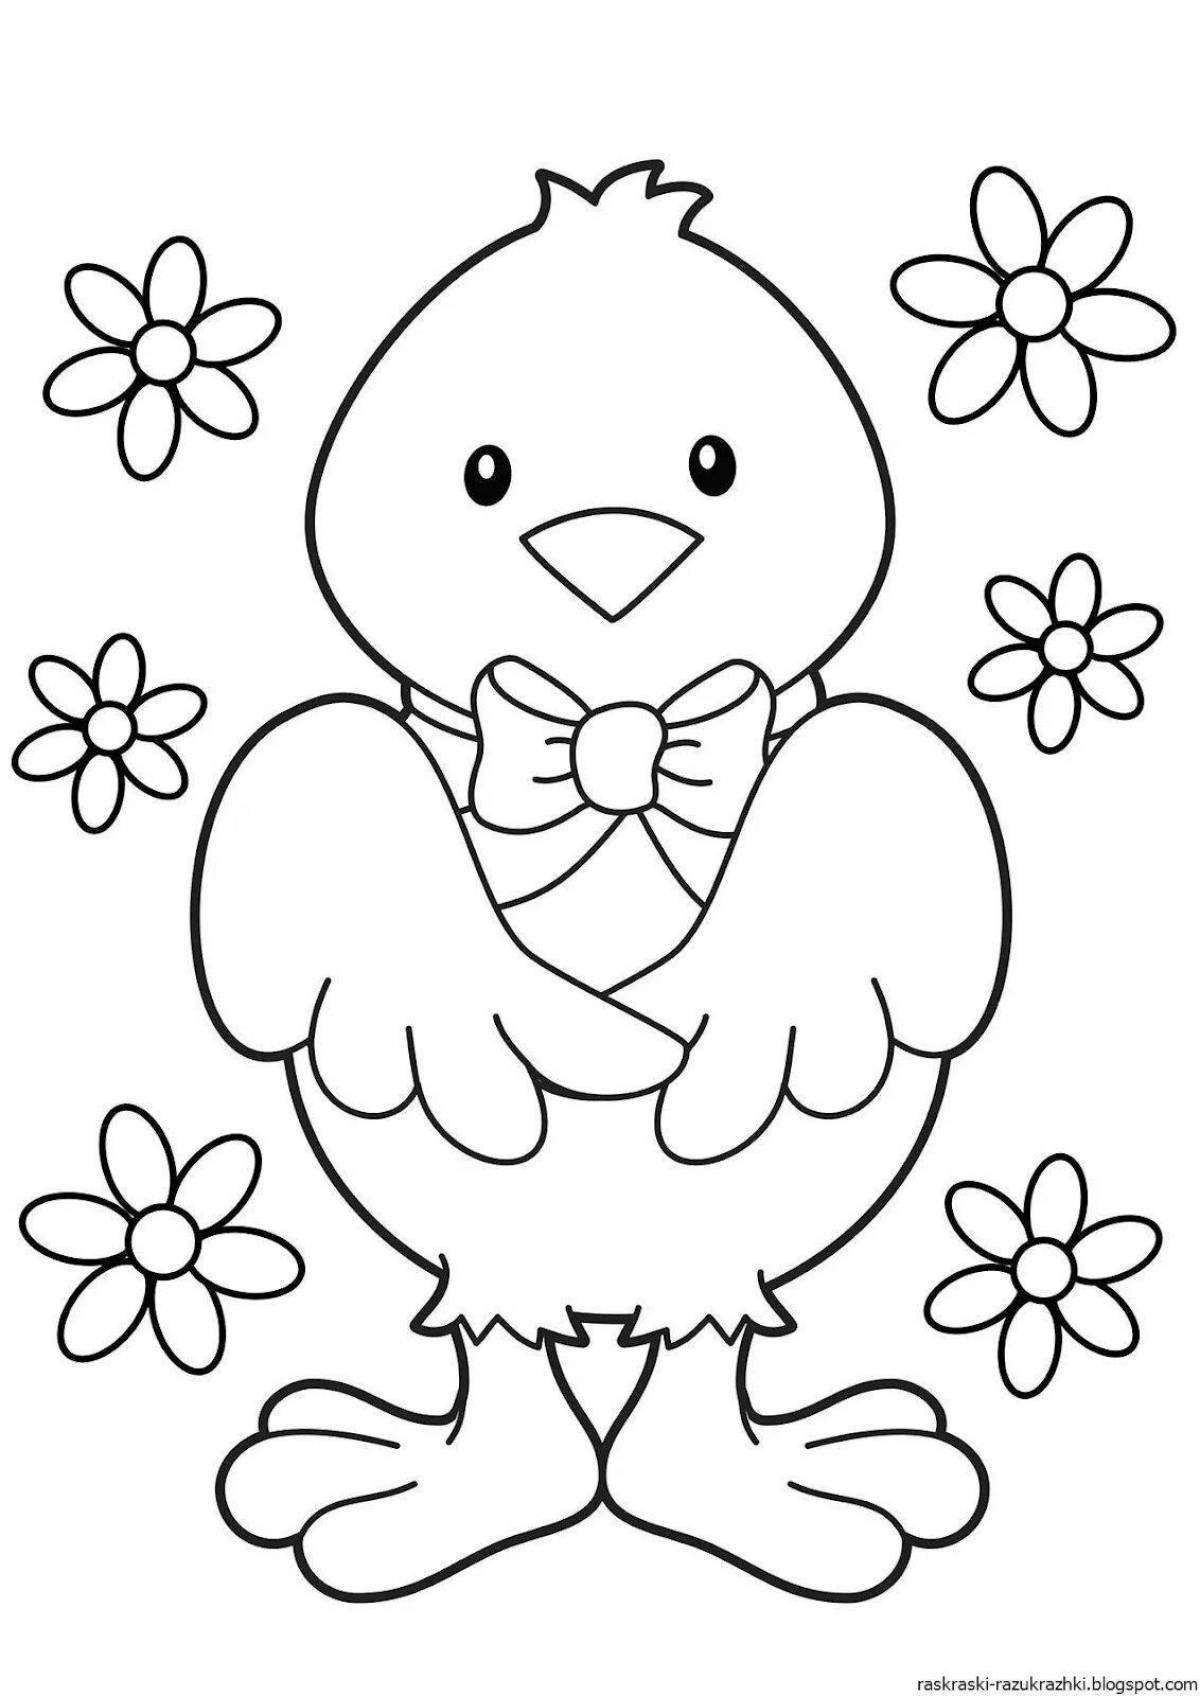 Cute coloring book for kids